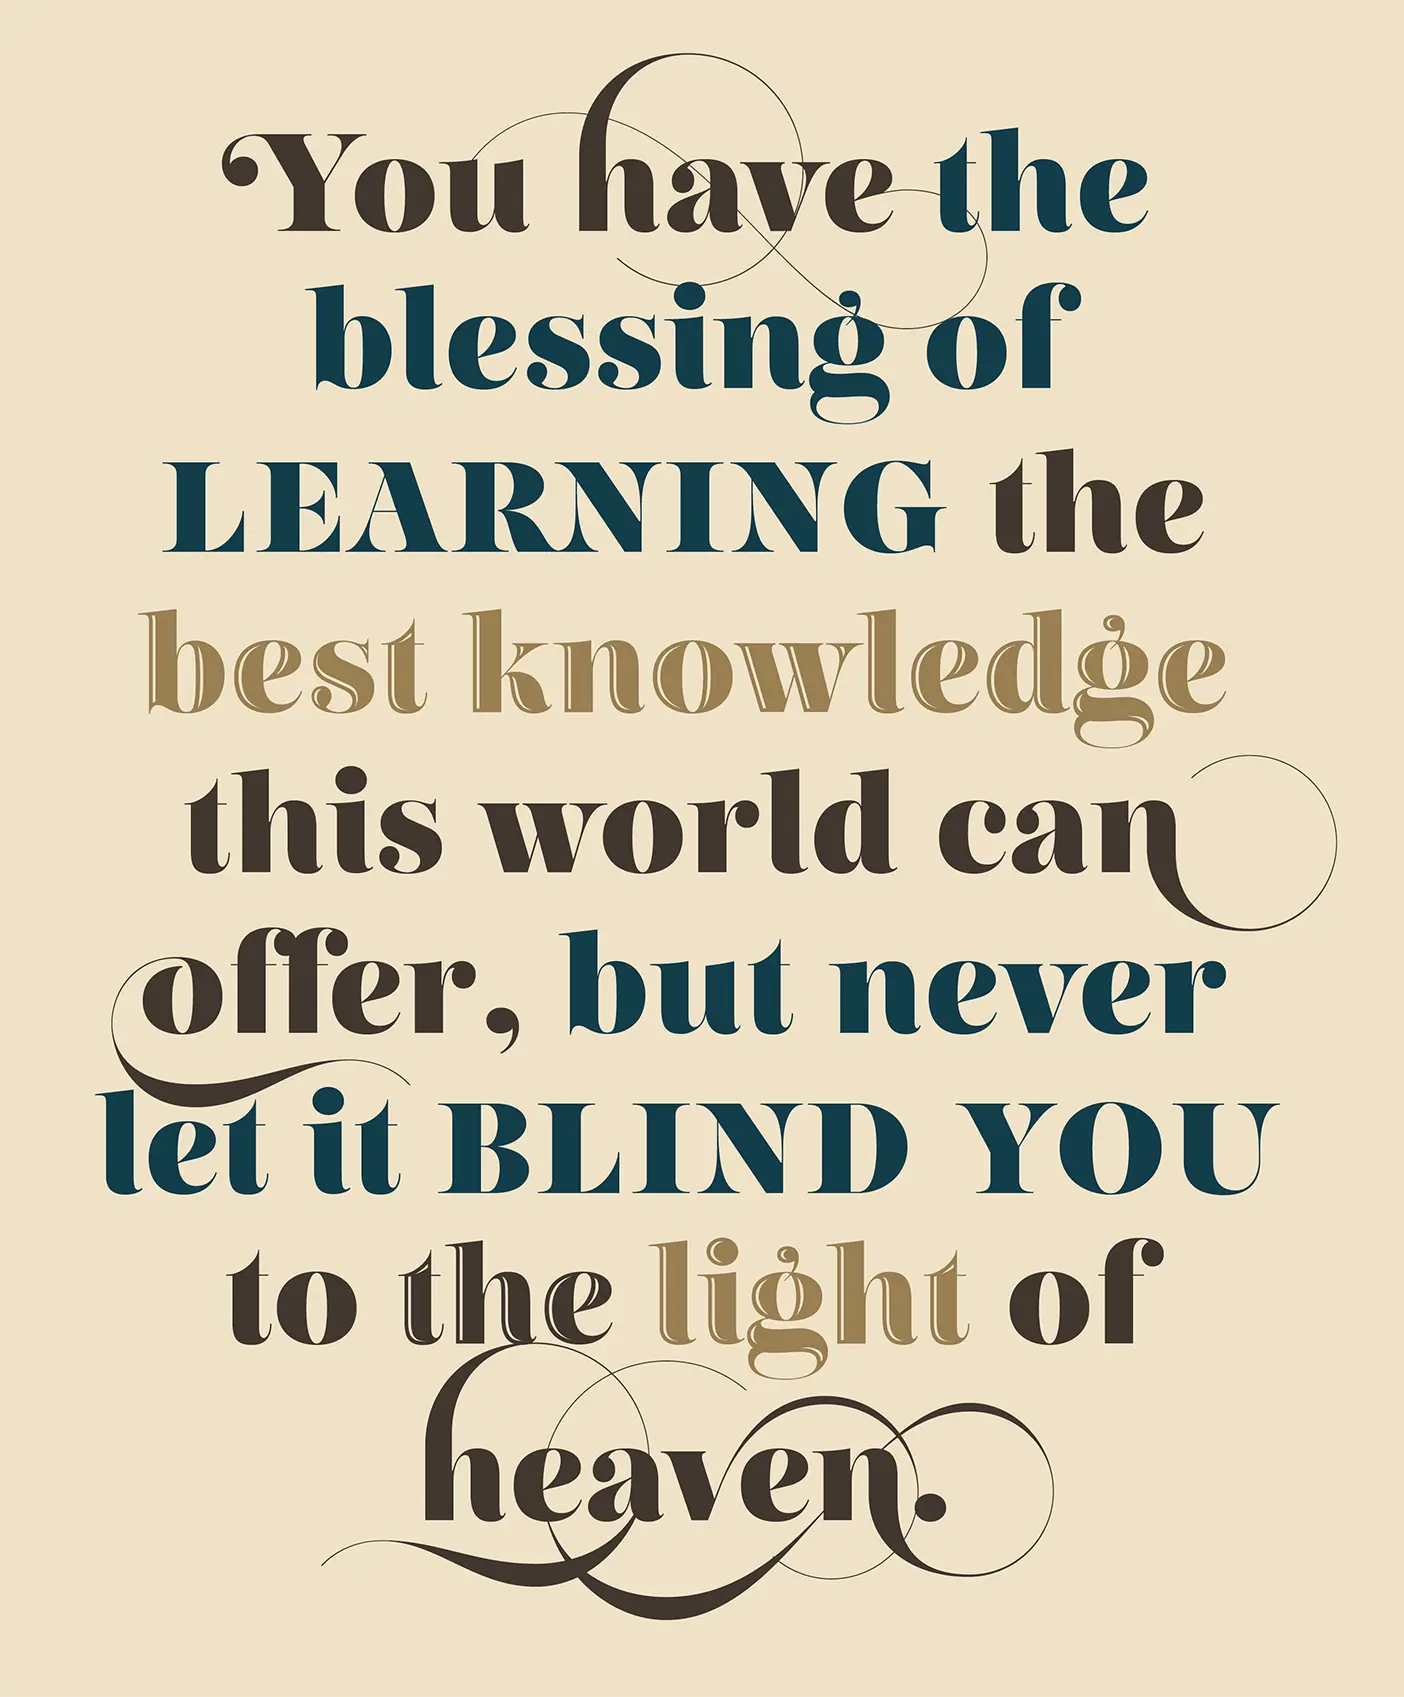 You have the blessing of LEARNING the best knowledge this world can offer, but never let it BLIND YOU to the light of heaven.